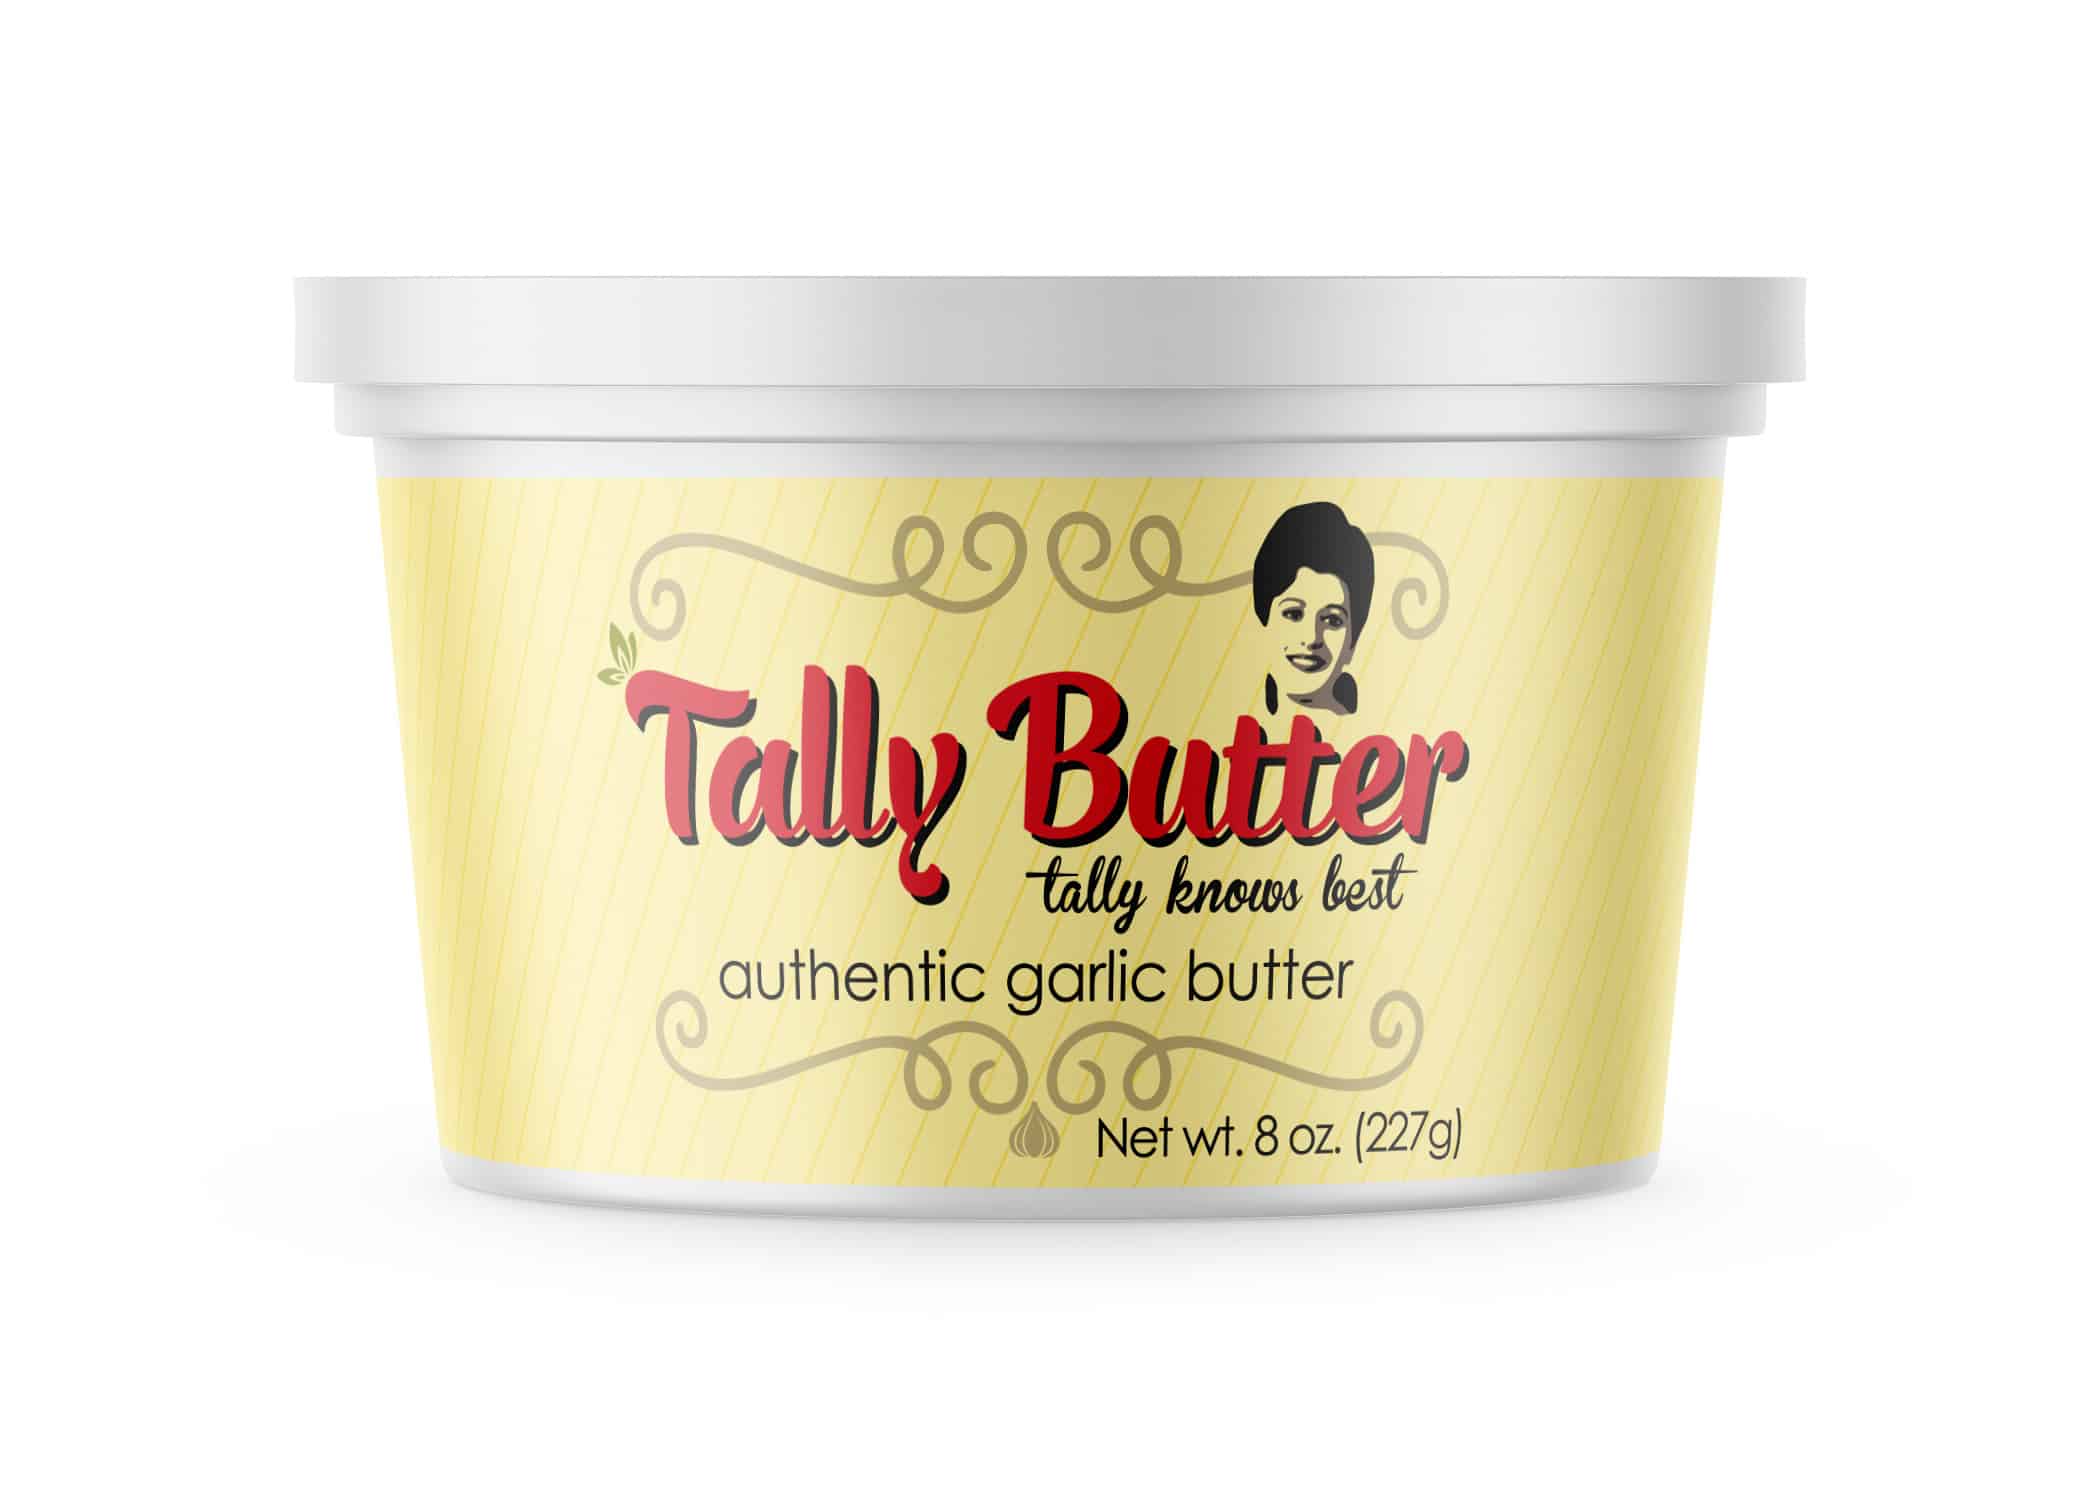 Tally Butter vintage-inspired packaging with logo over soft yellow canister and swirls and garlic clove design elements.